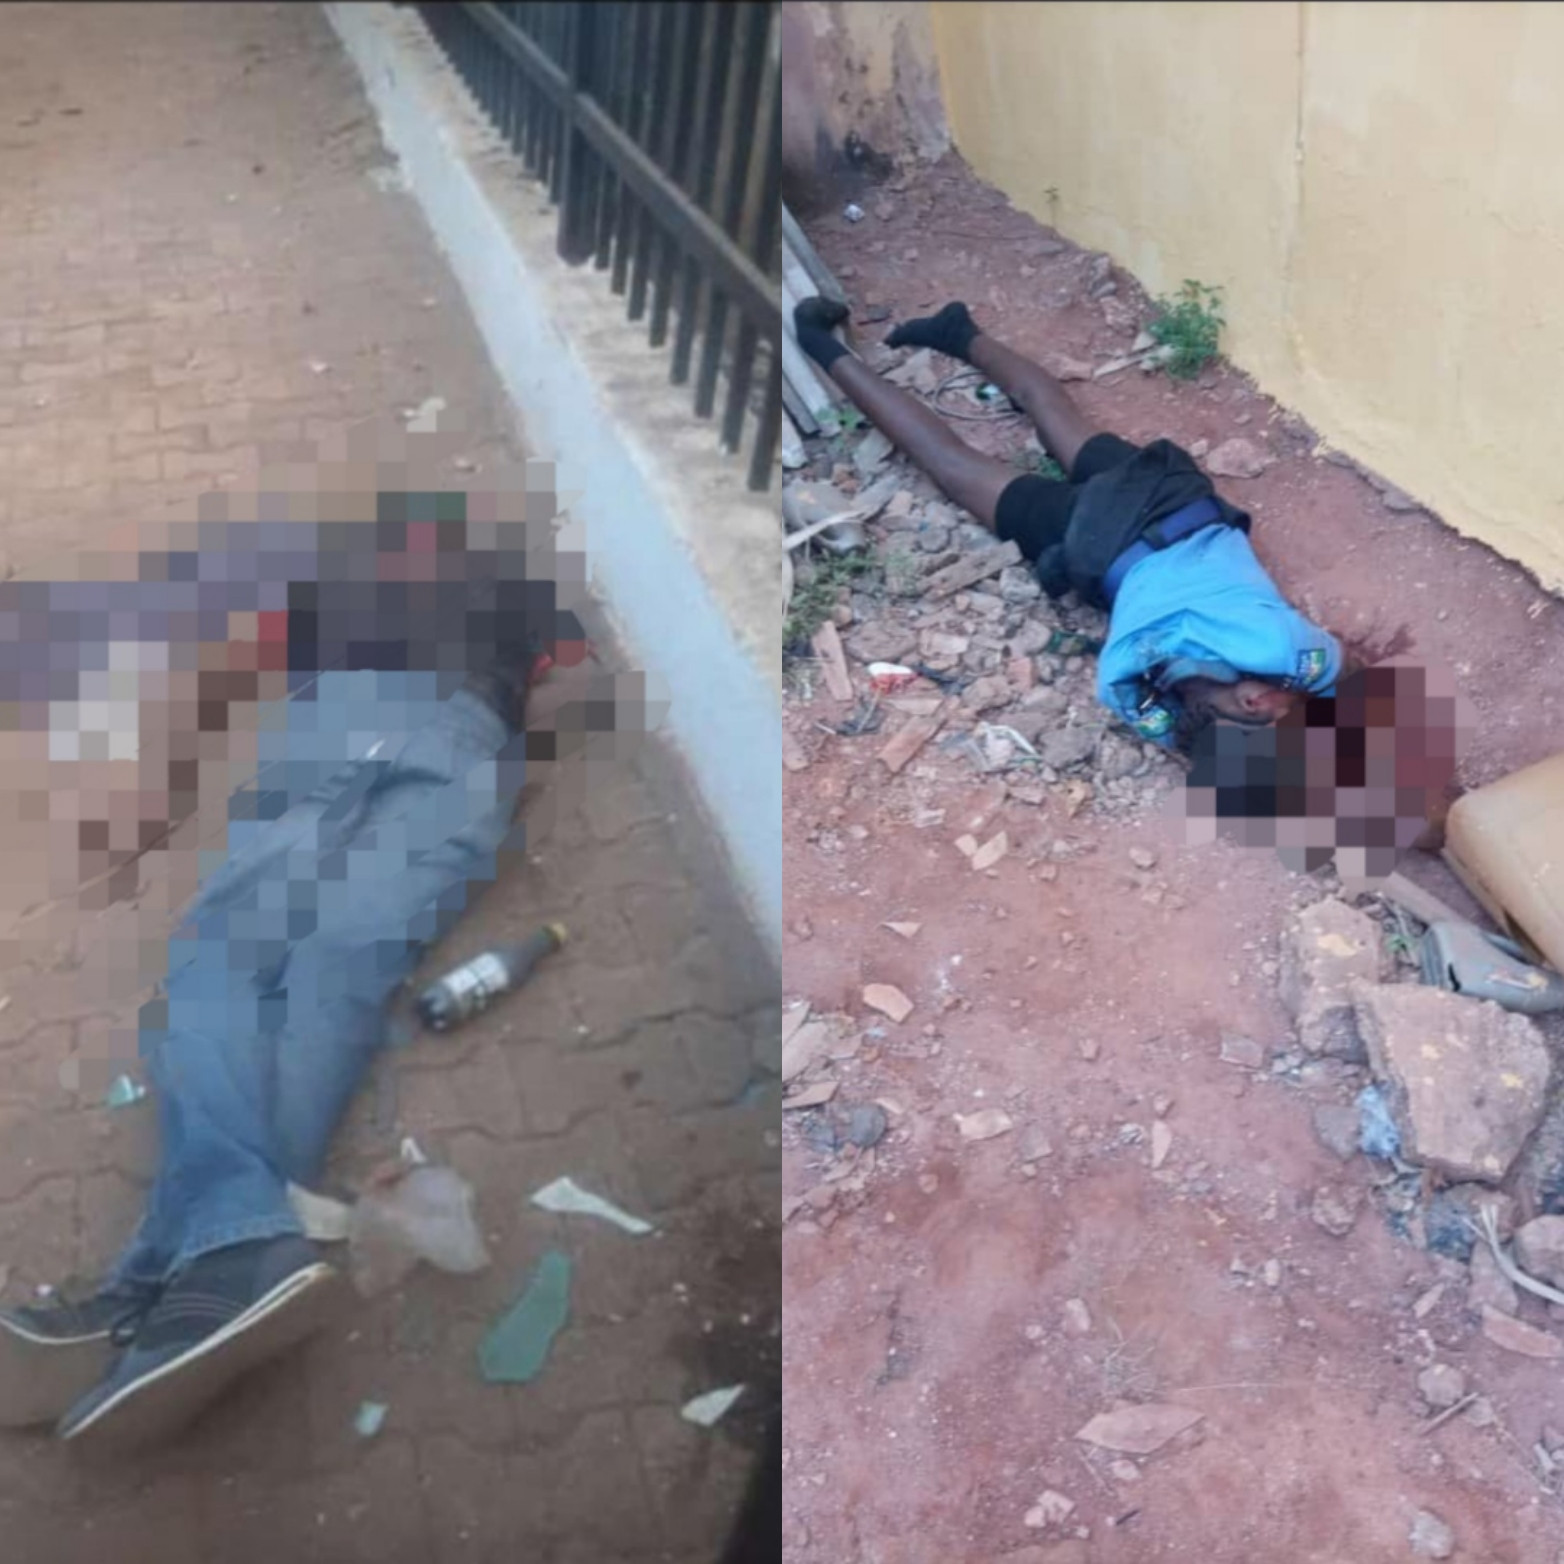 MANY KILLED AS ARMED ROBBERS ATTACK MULTIPLE BANKS IN UROMI, EDO STATE (GRAPHIC PHOTOS)